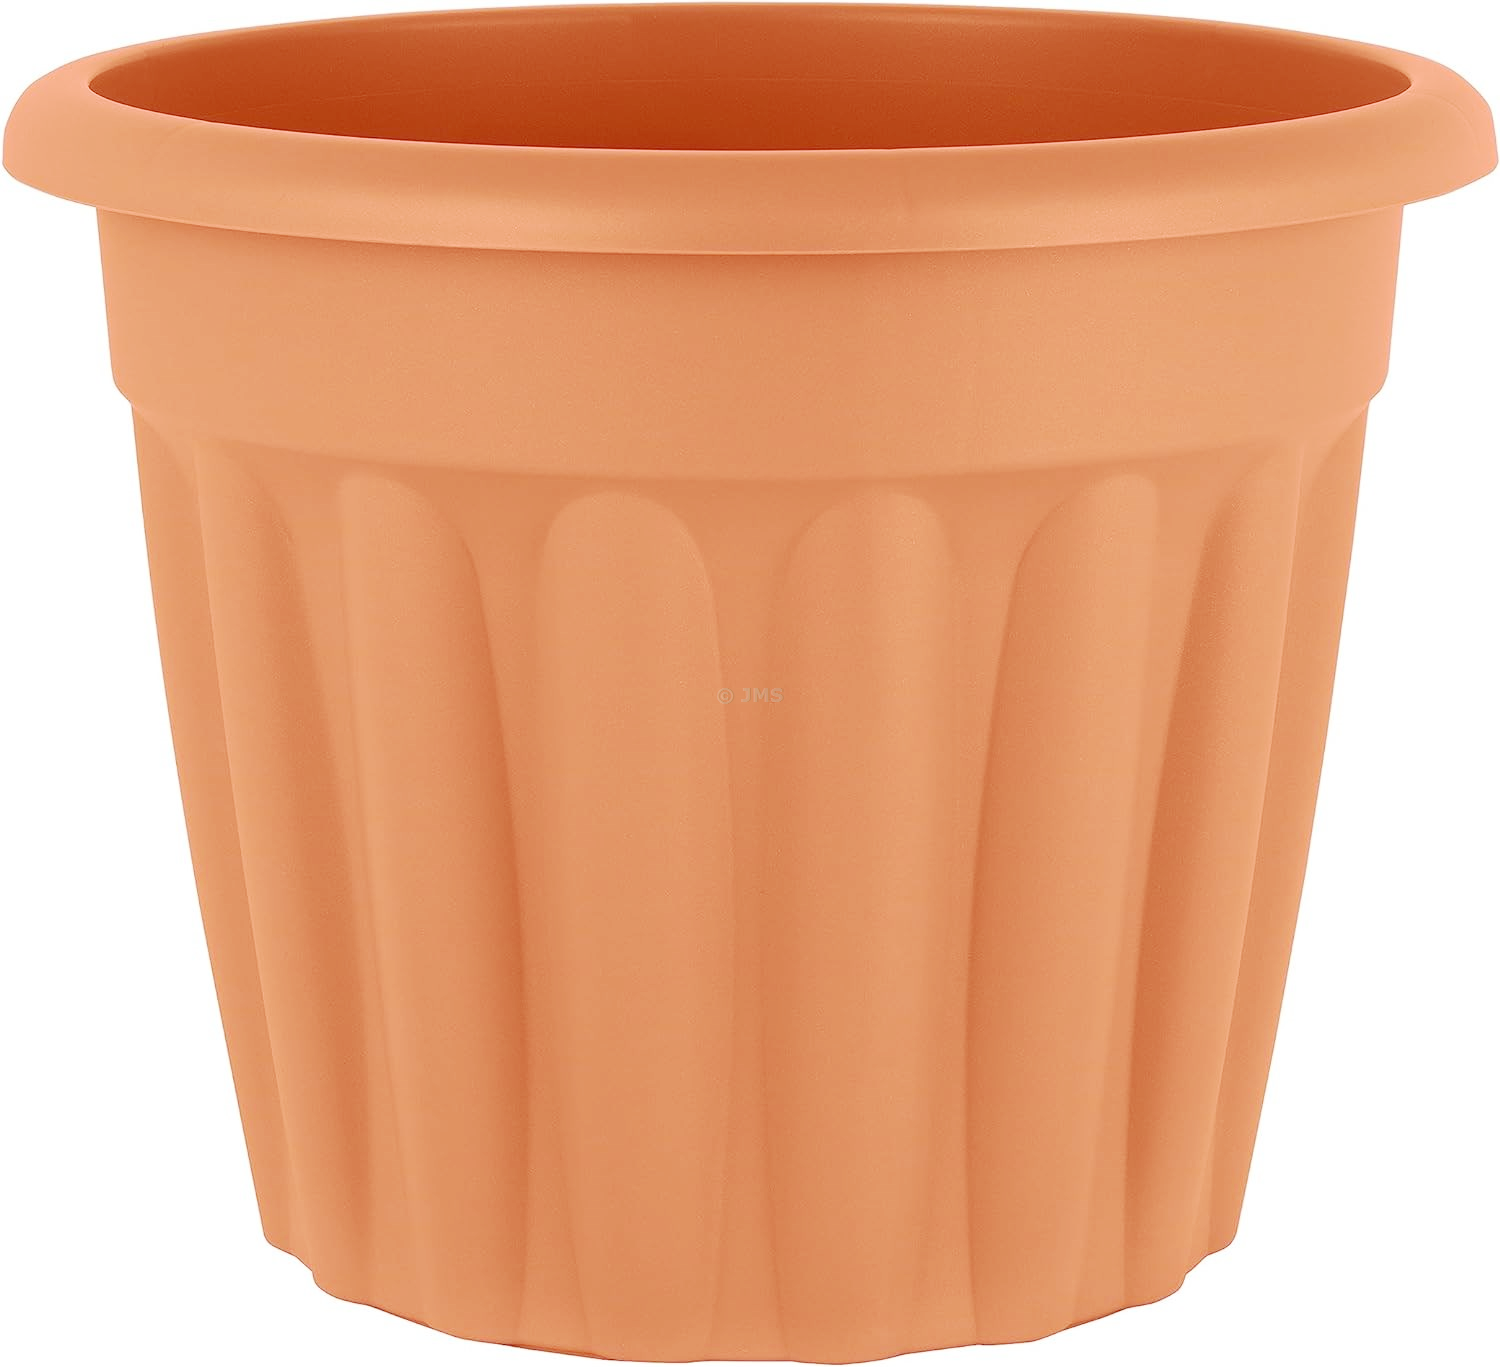 Large 50cm Round Garden Planter (42 Litres) Terracotta Home Office Cafe Restaurant - Made in Britain